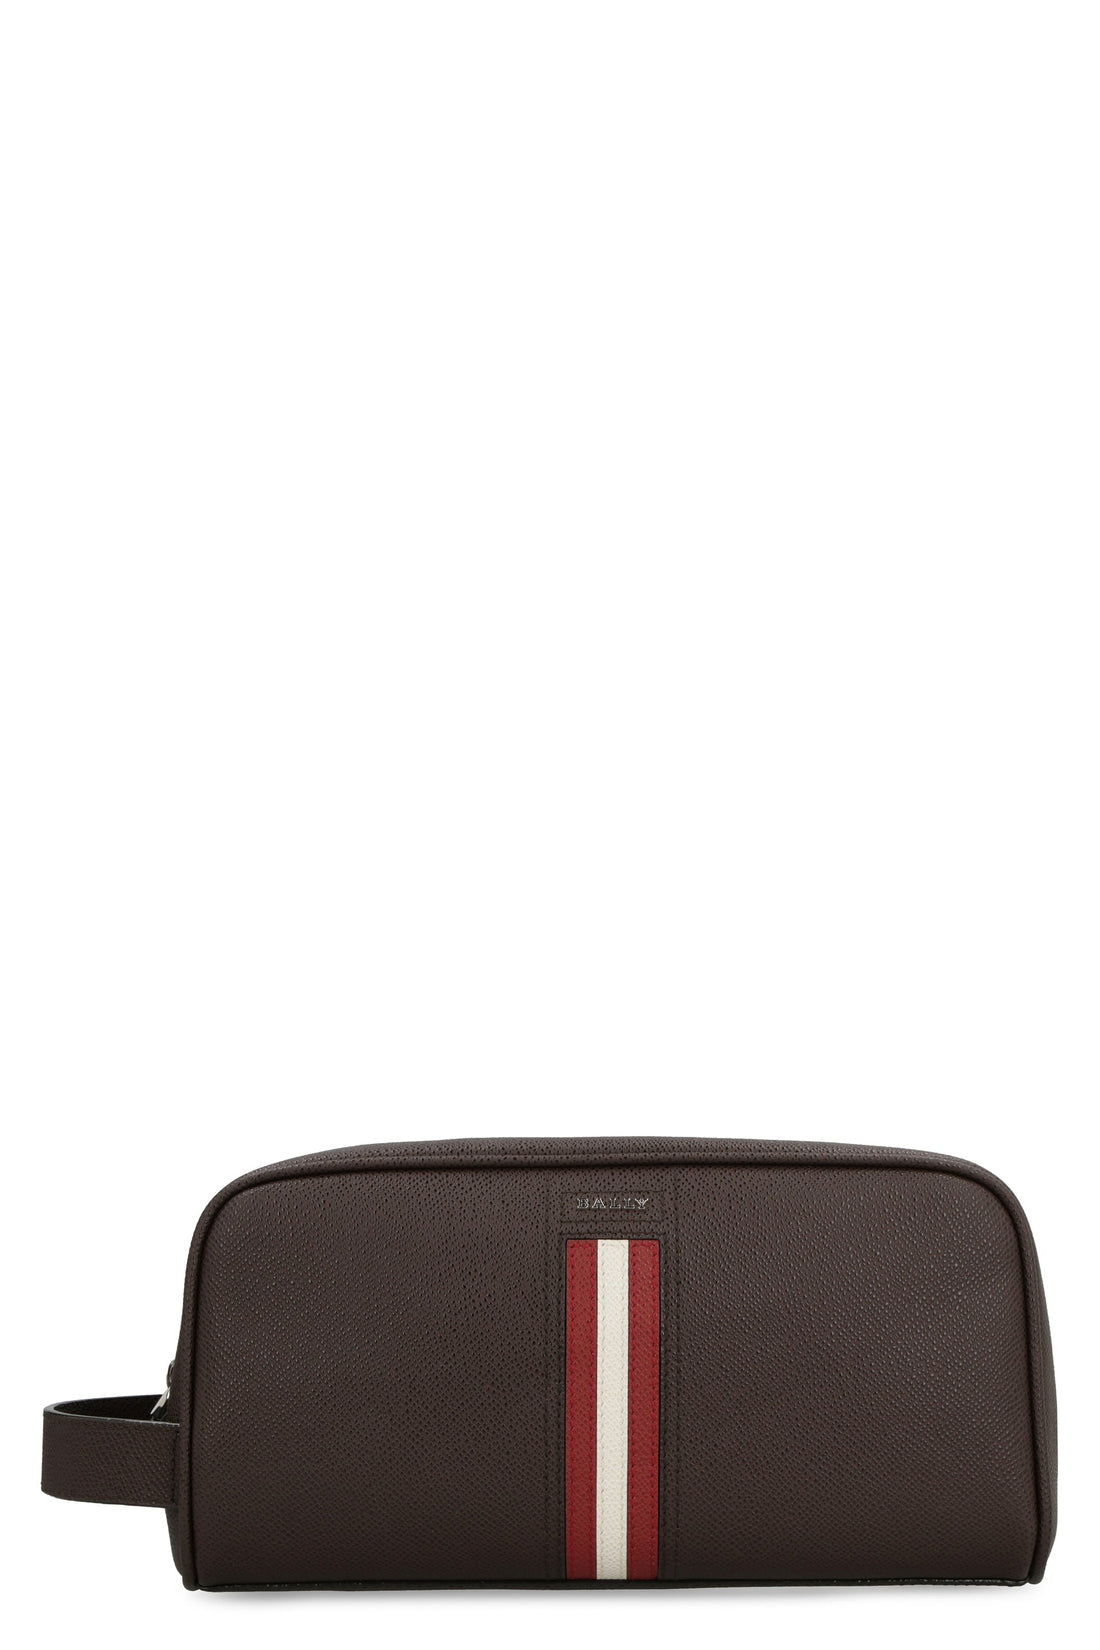 Bally-OUTLET-SALE-Takimo leather beauty case-ARCHIVIST